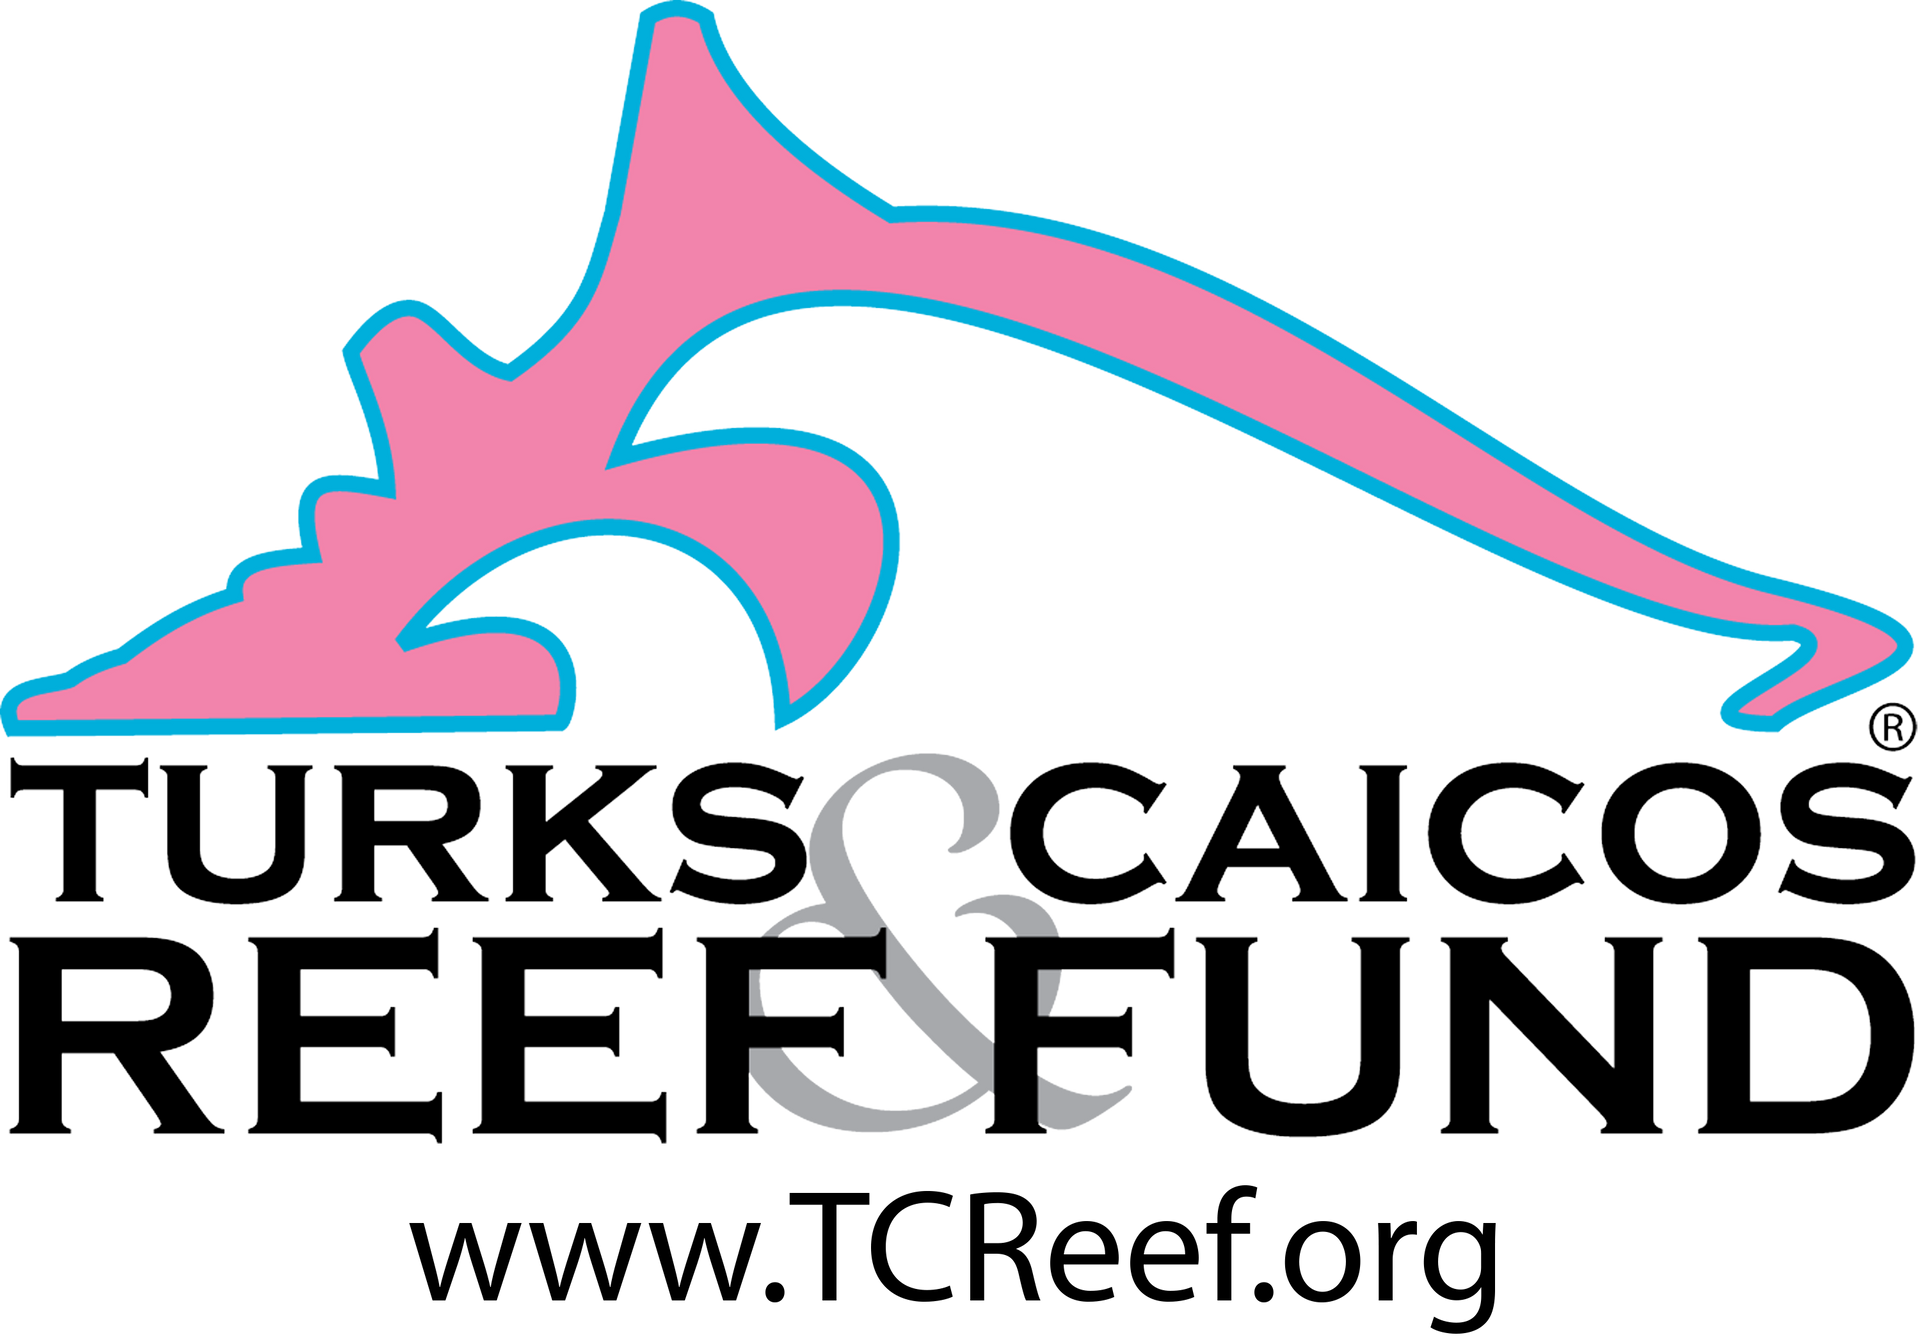 a logo for turks and caicos reef fund